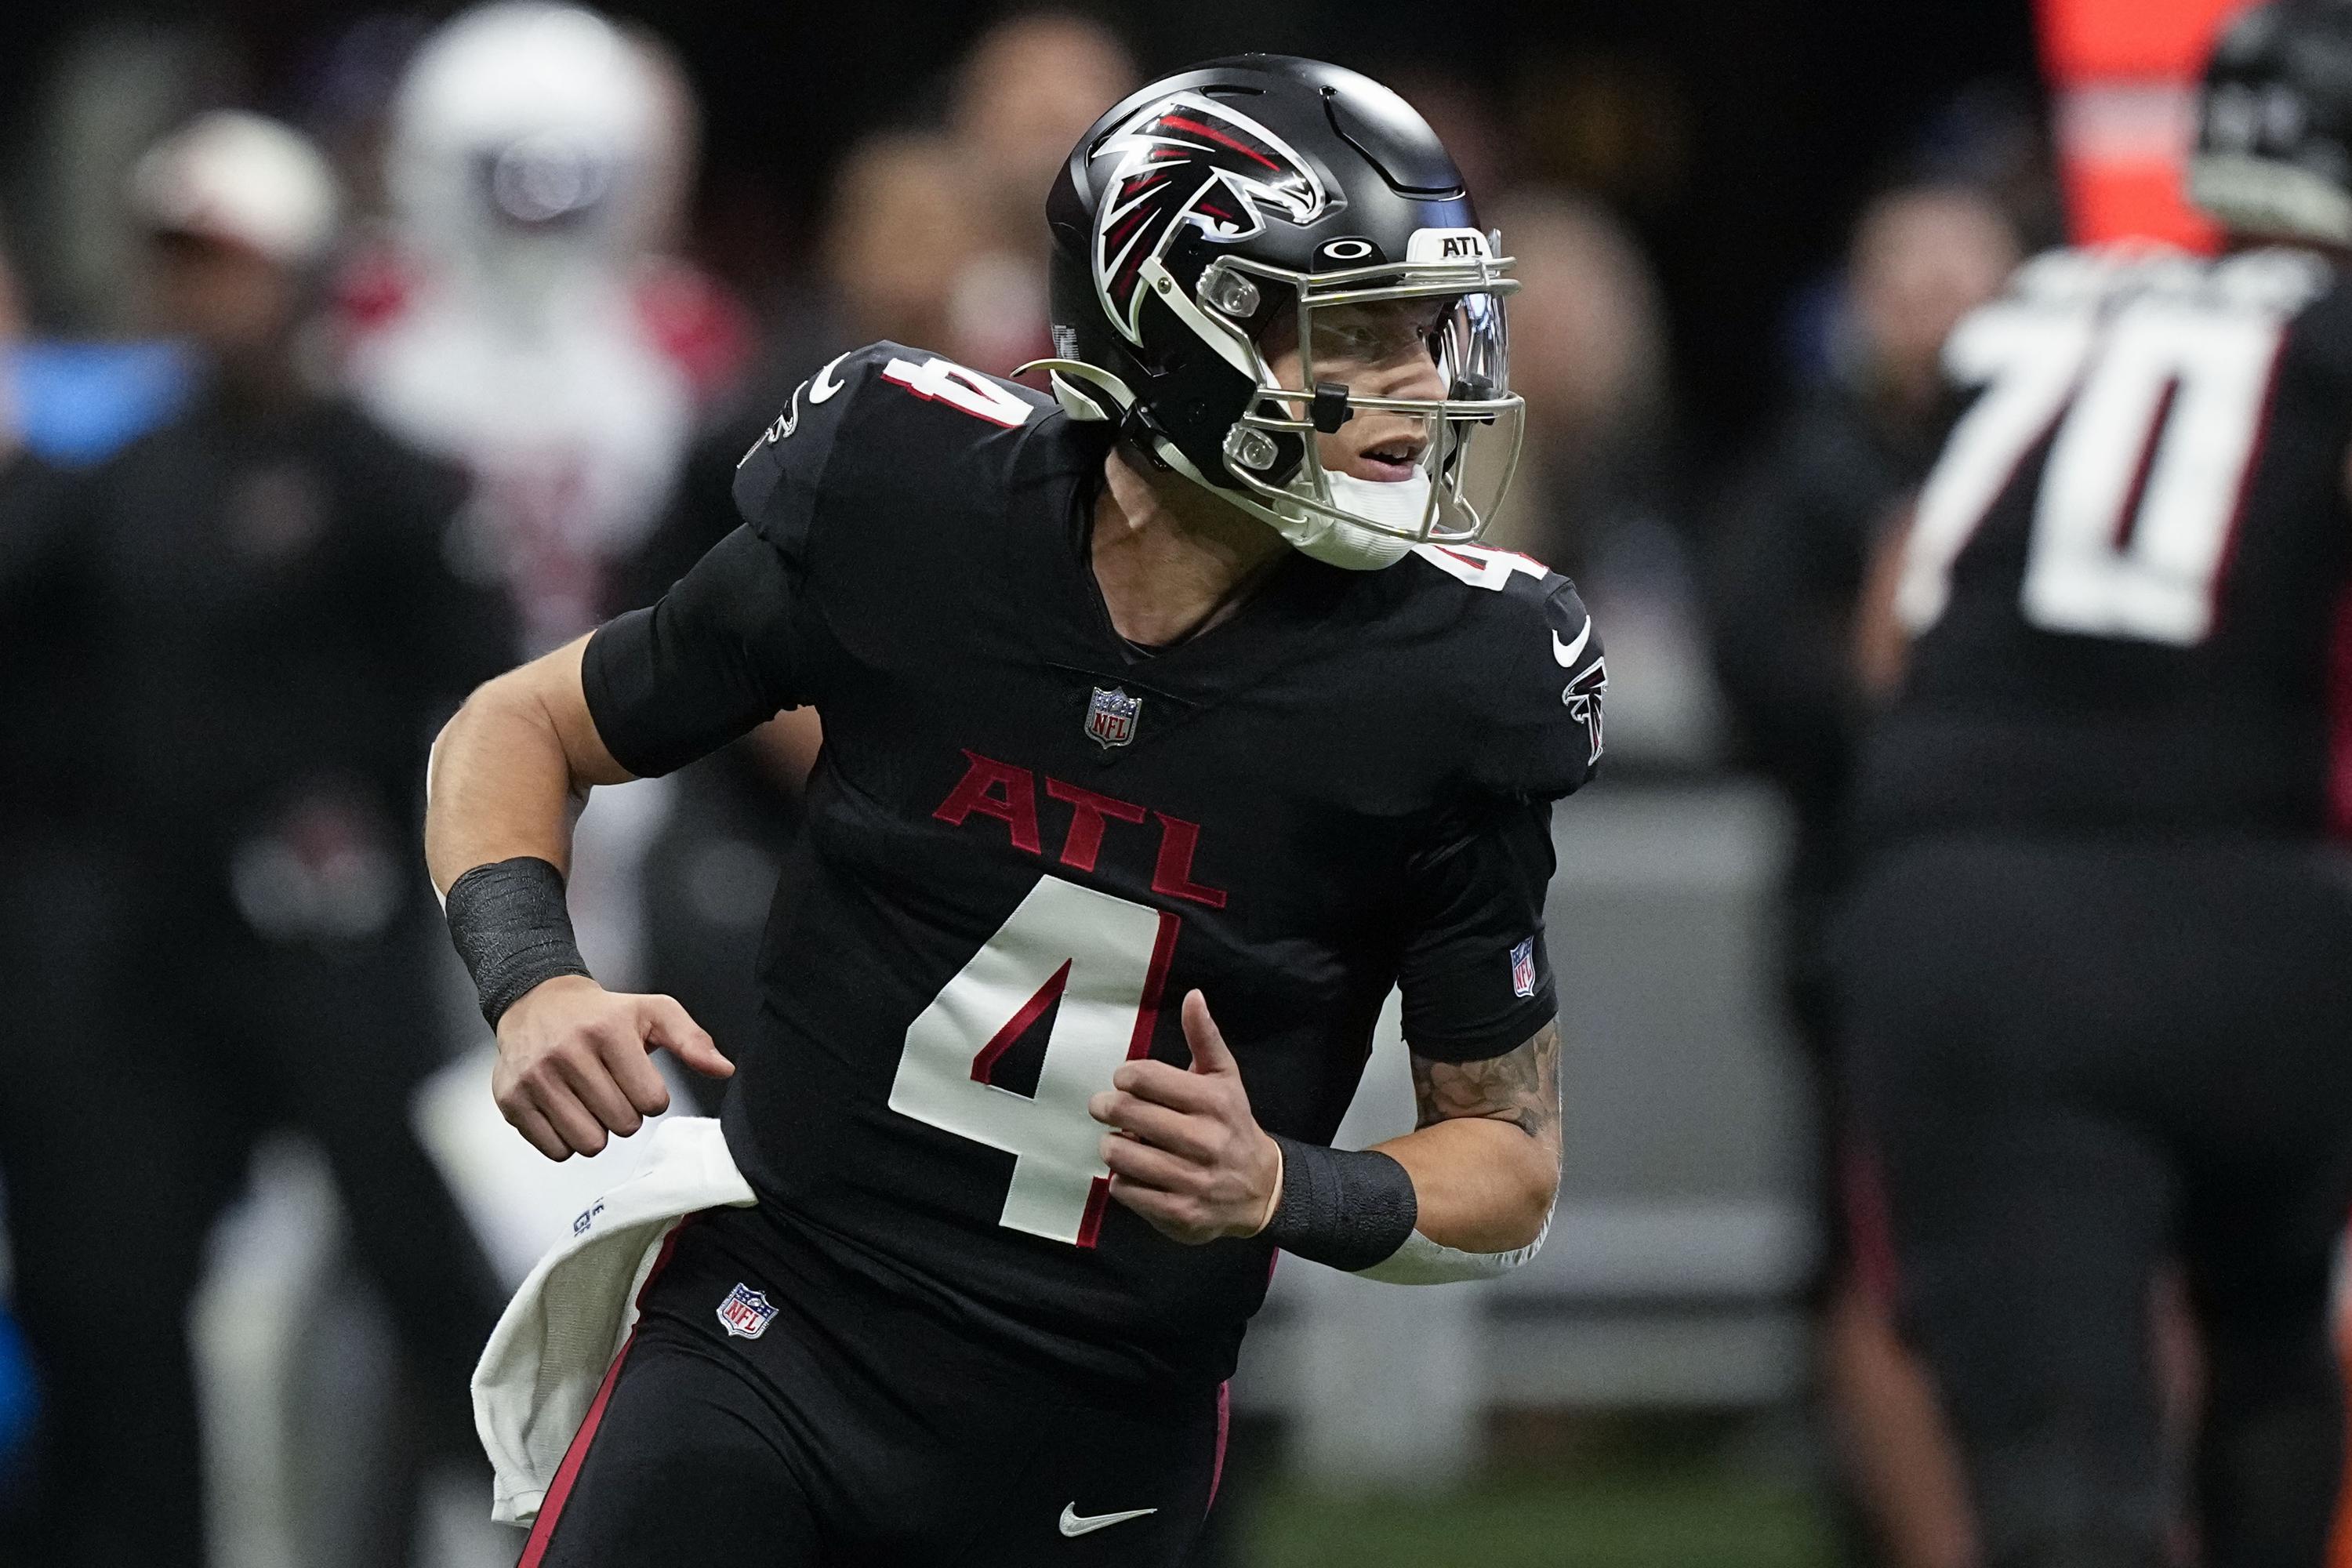 kold svindler pude Ridder poised on final drive, feels confident as Falcons' QB | AP News